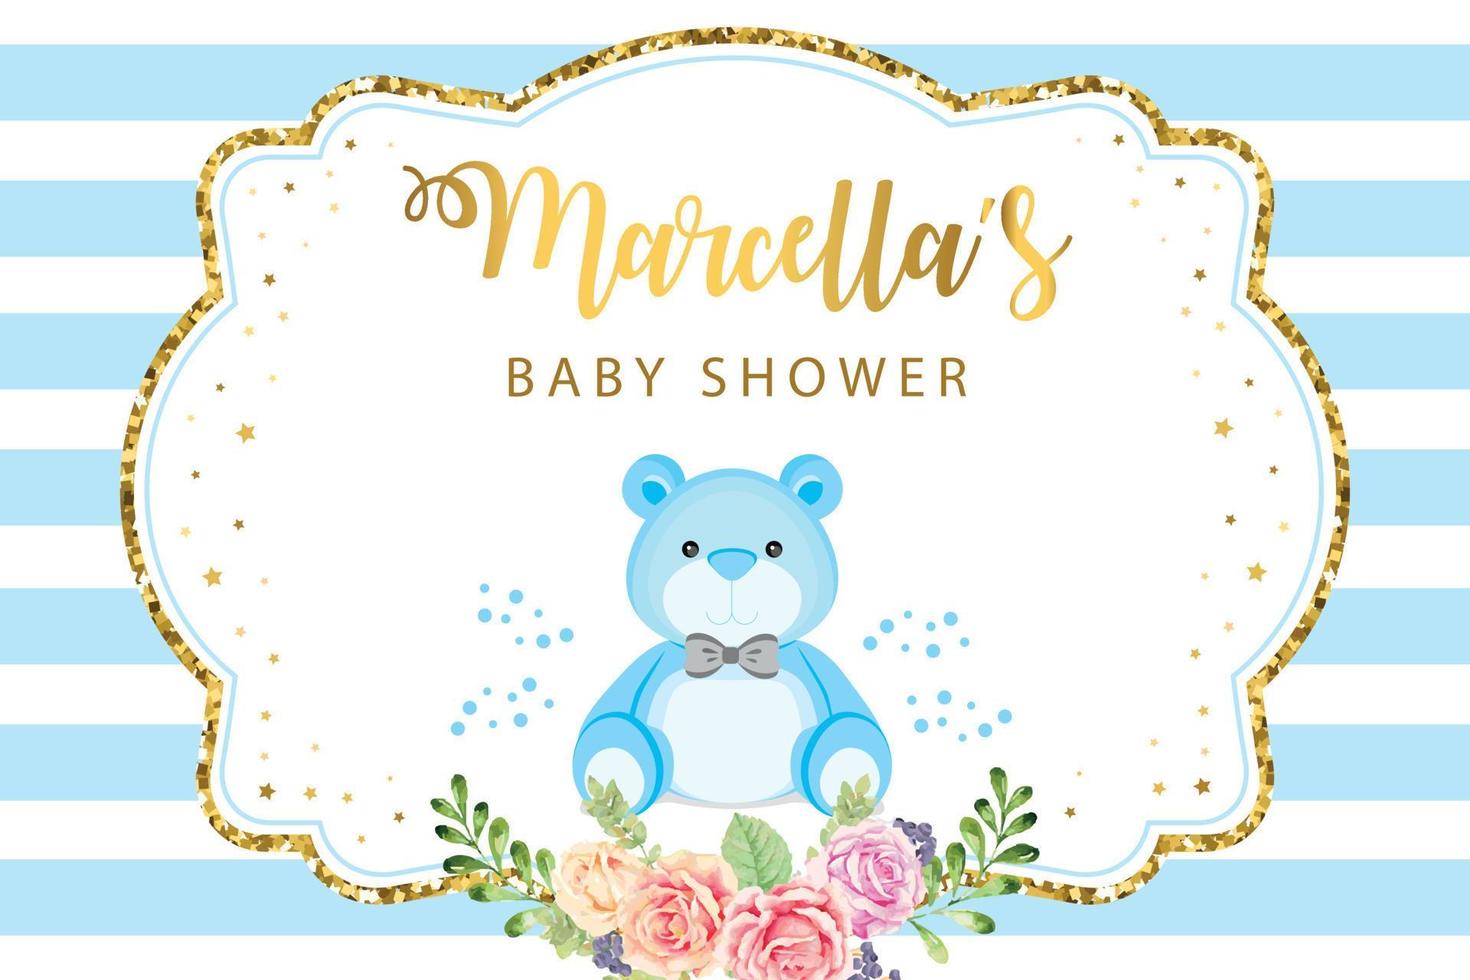 Baby Shower Party Backdrop with blue bear vector